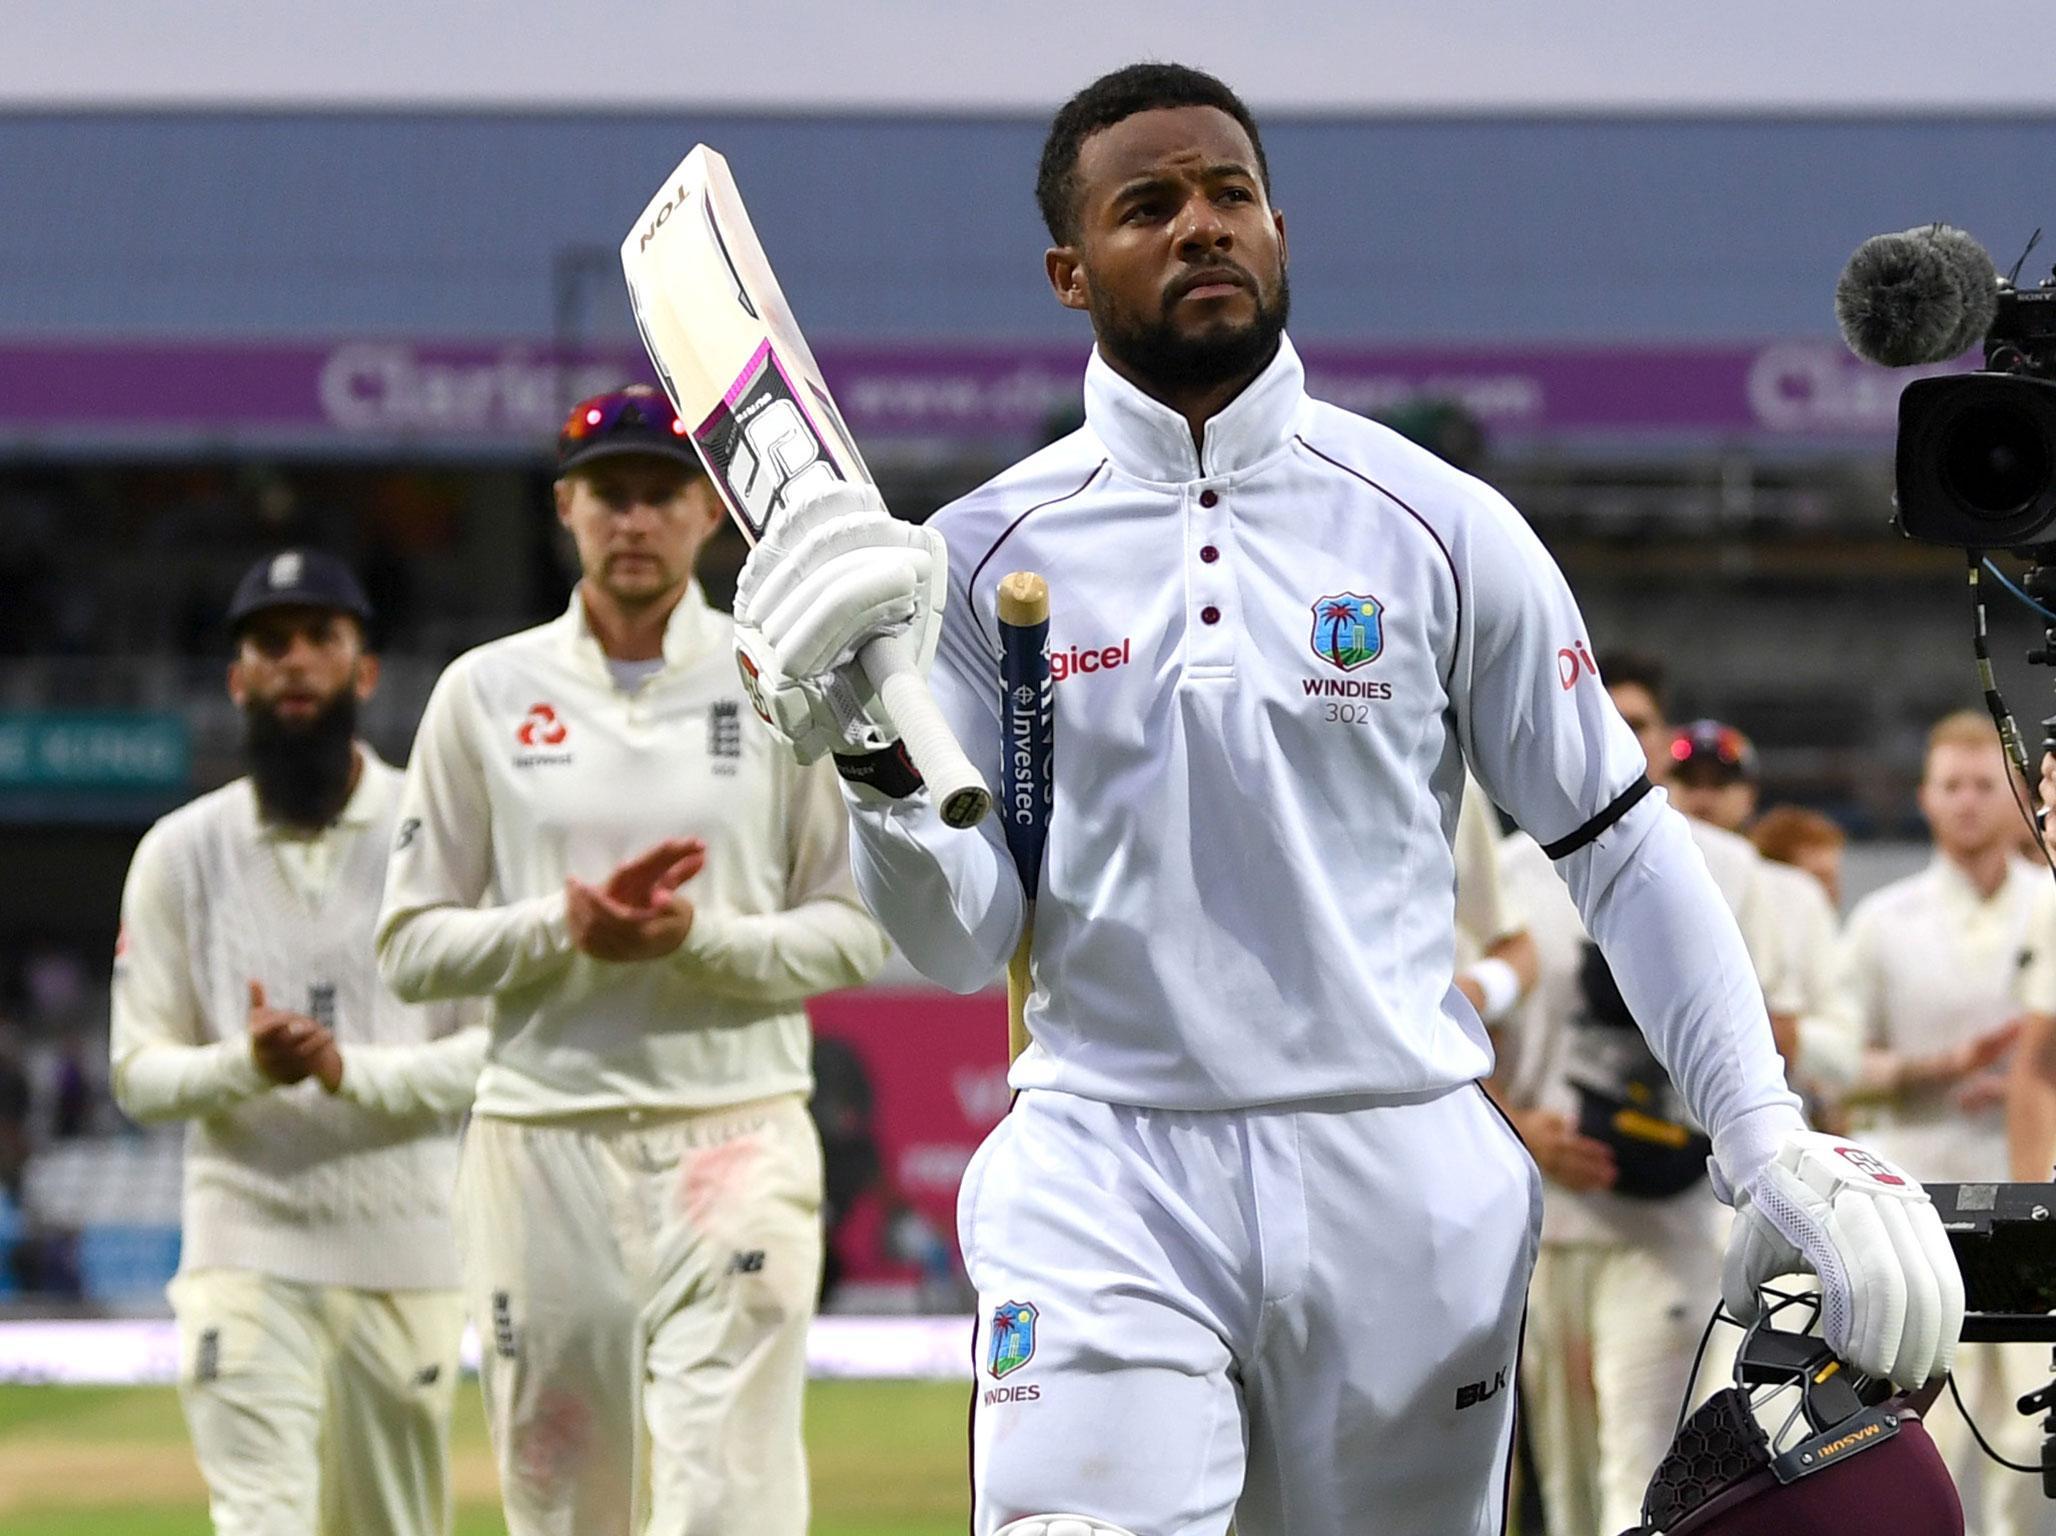 West Indies roared back to level the series against England with a much-improved batting display